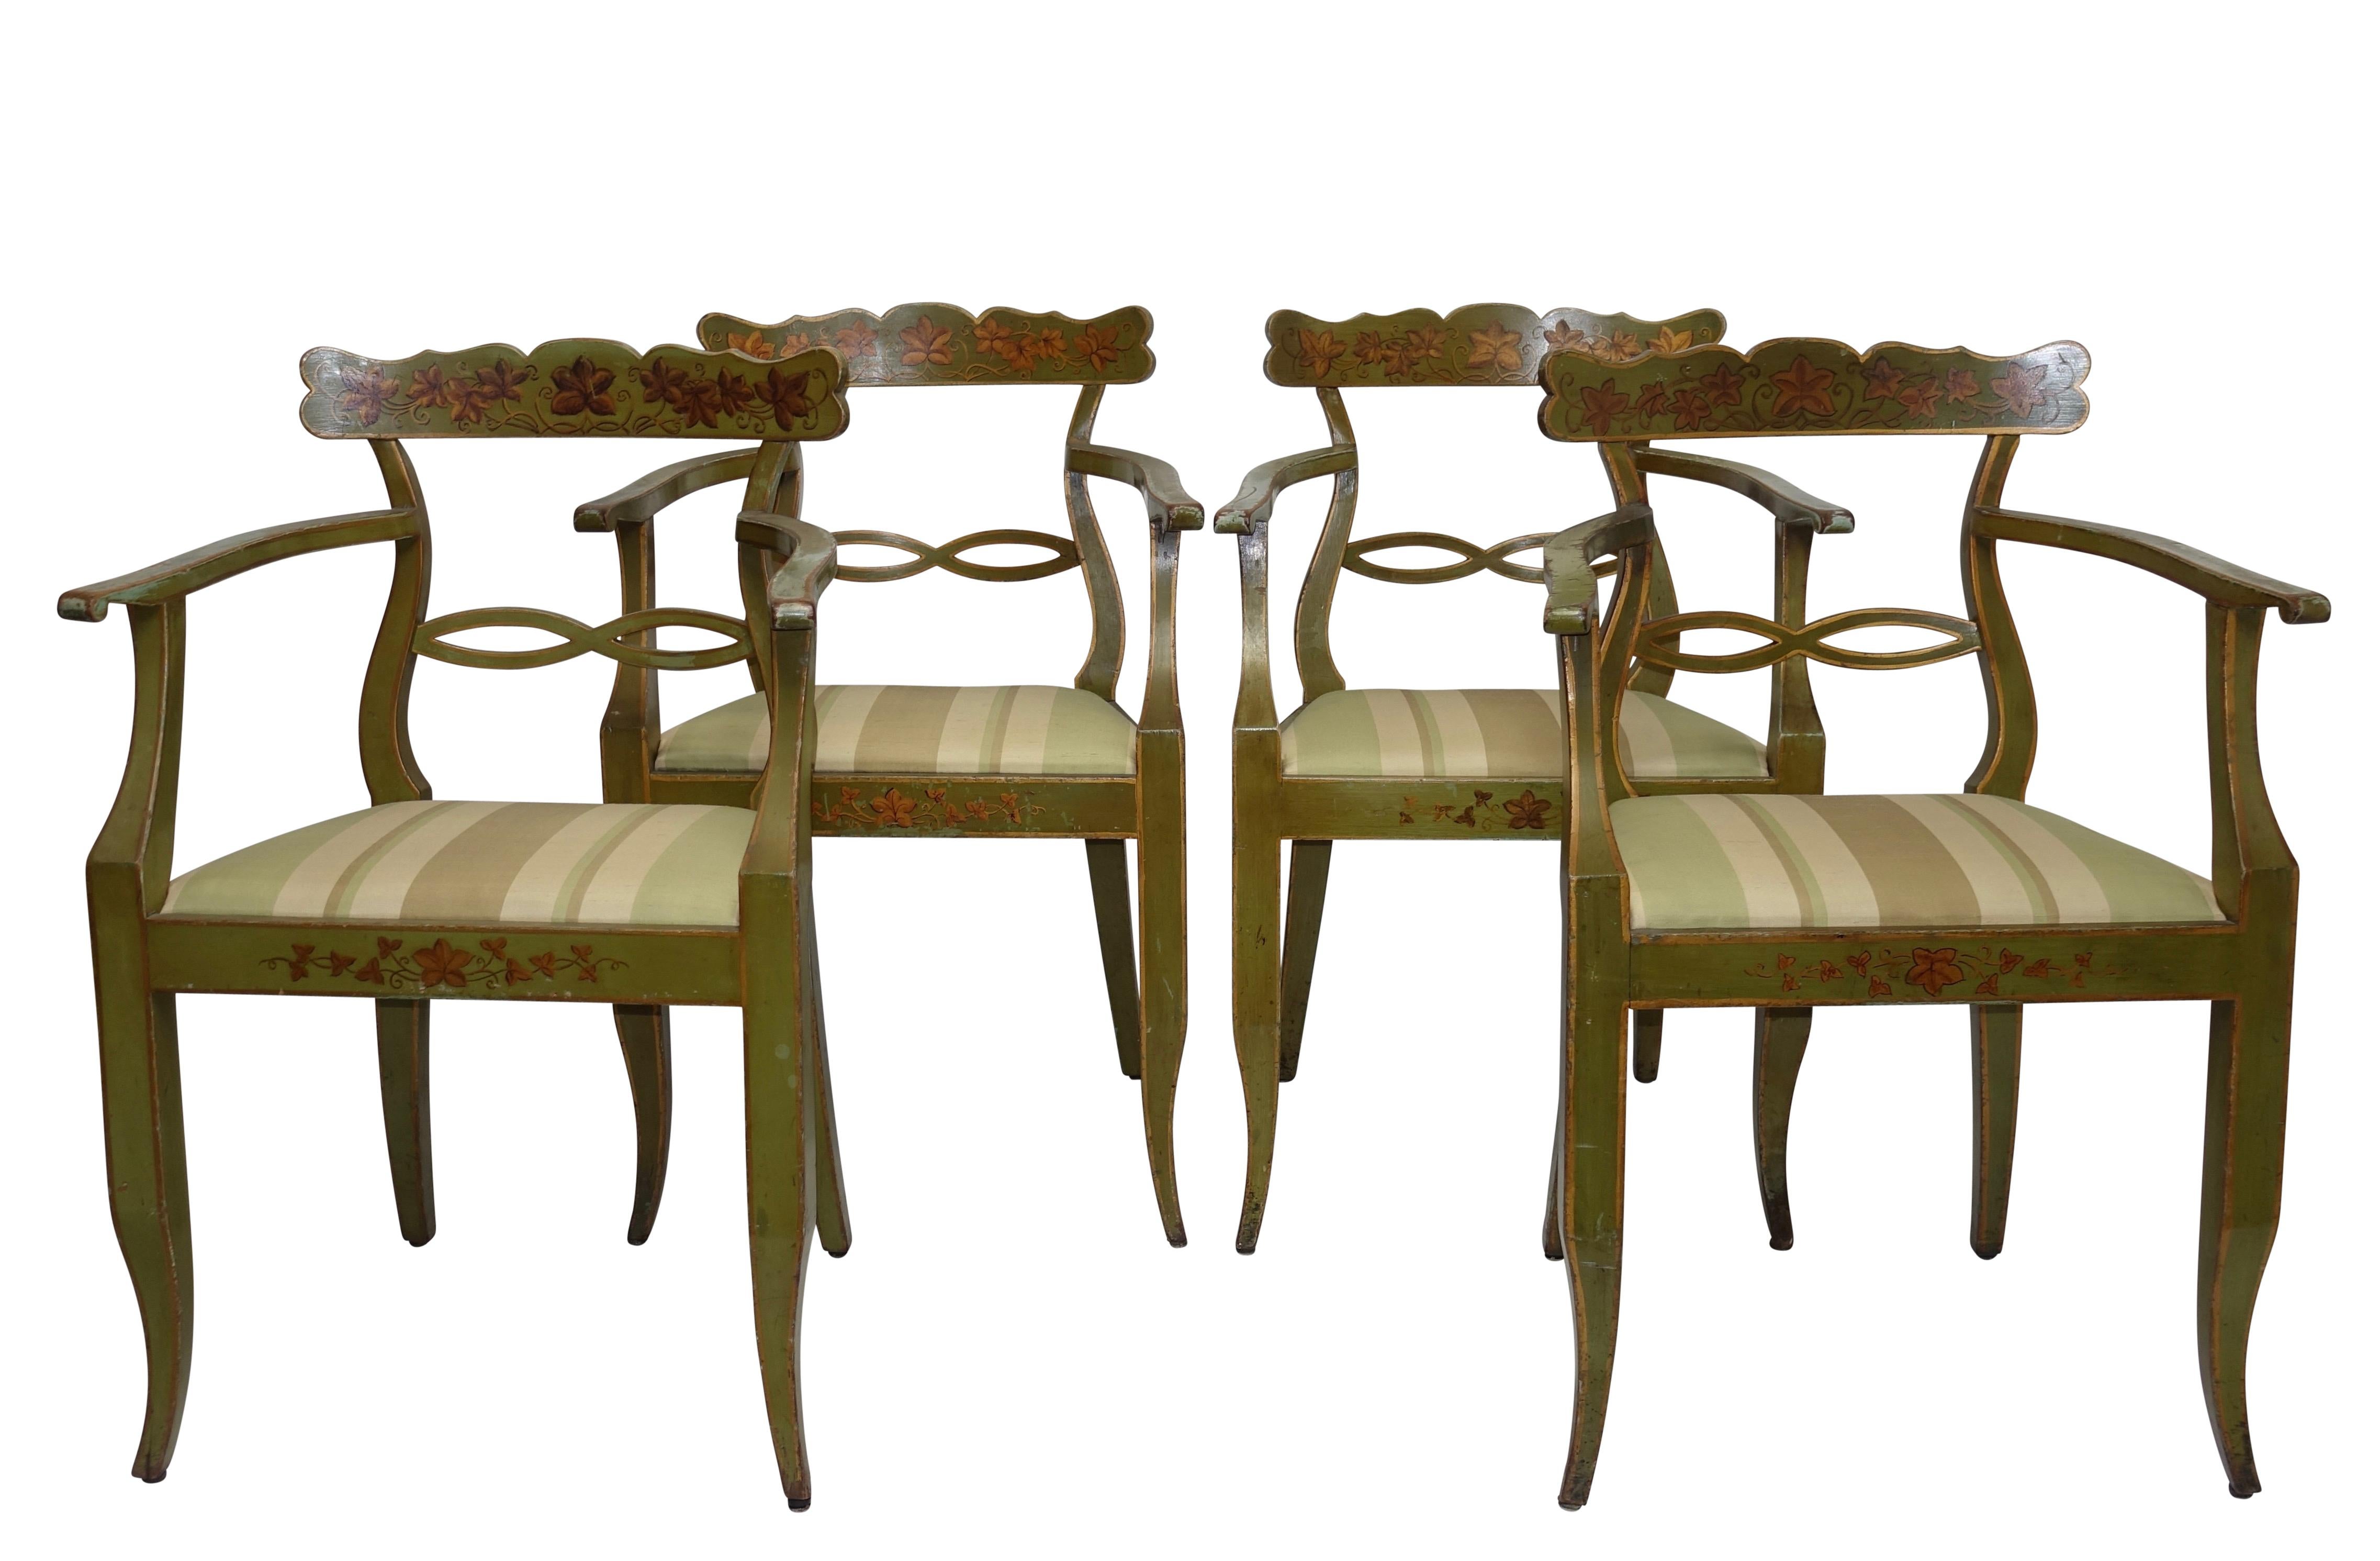 A set of four green painted armchairs with gilt accenting and vining ivy across the back rail and the front apron. Recently upholstered with green silk stripe fabric on the drop in seats. Northern European, 19th century.
Appropriate and expected